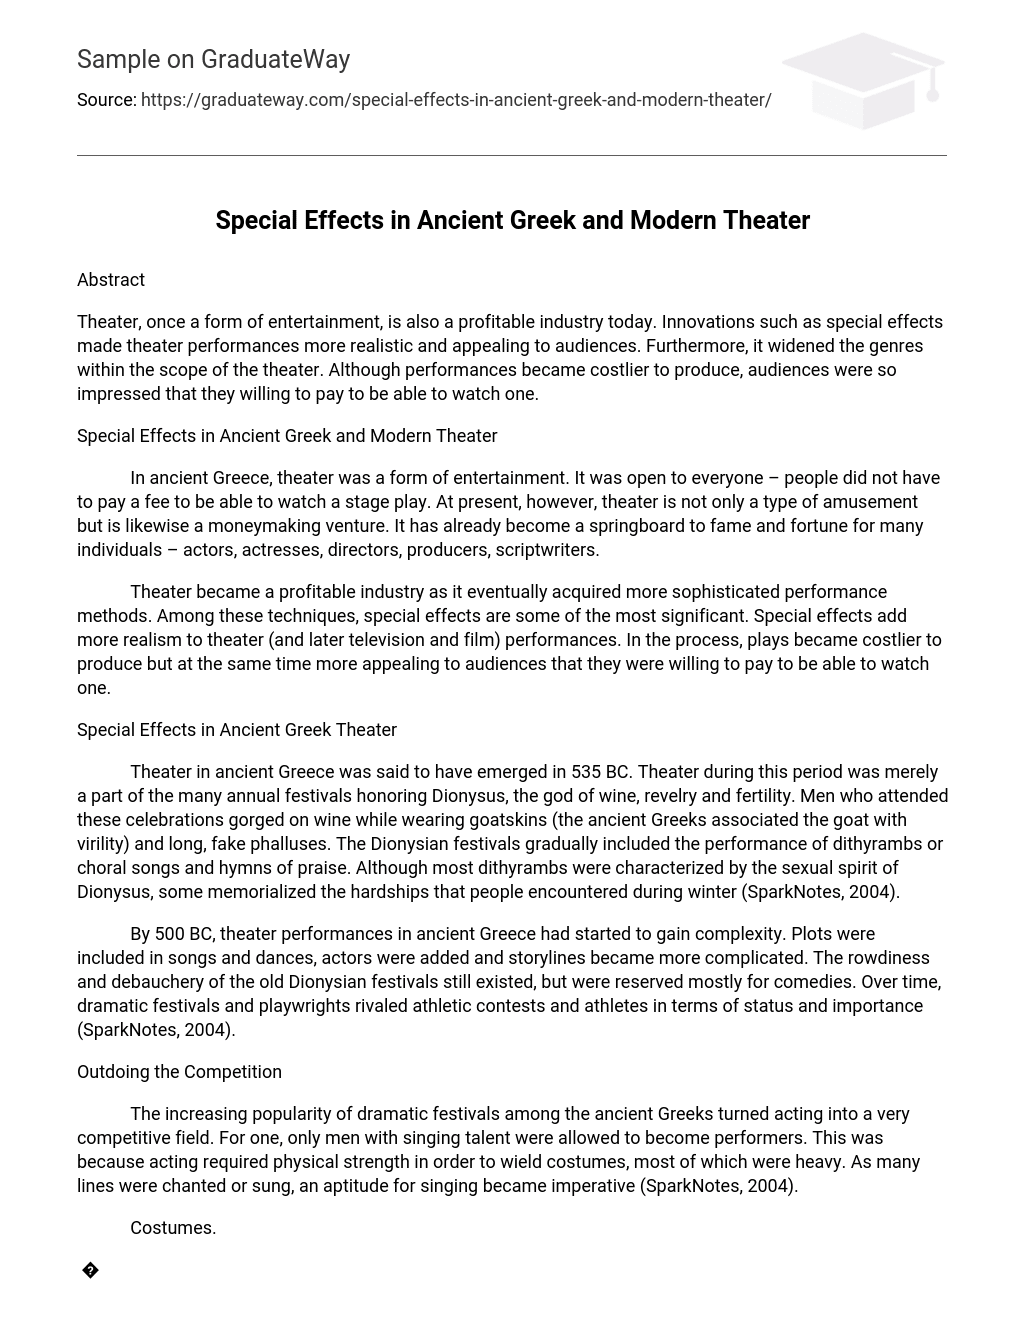 Special Effects in Ancient Greek and Modern Theater